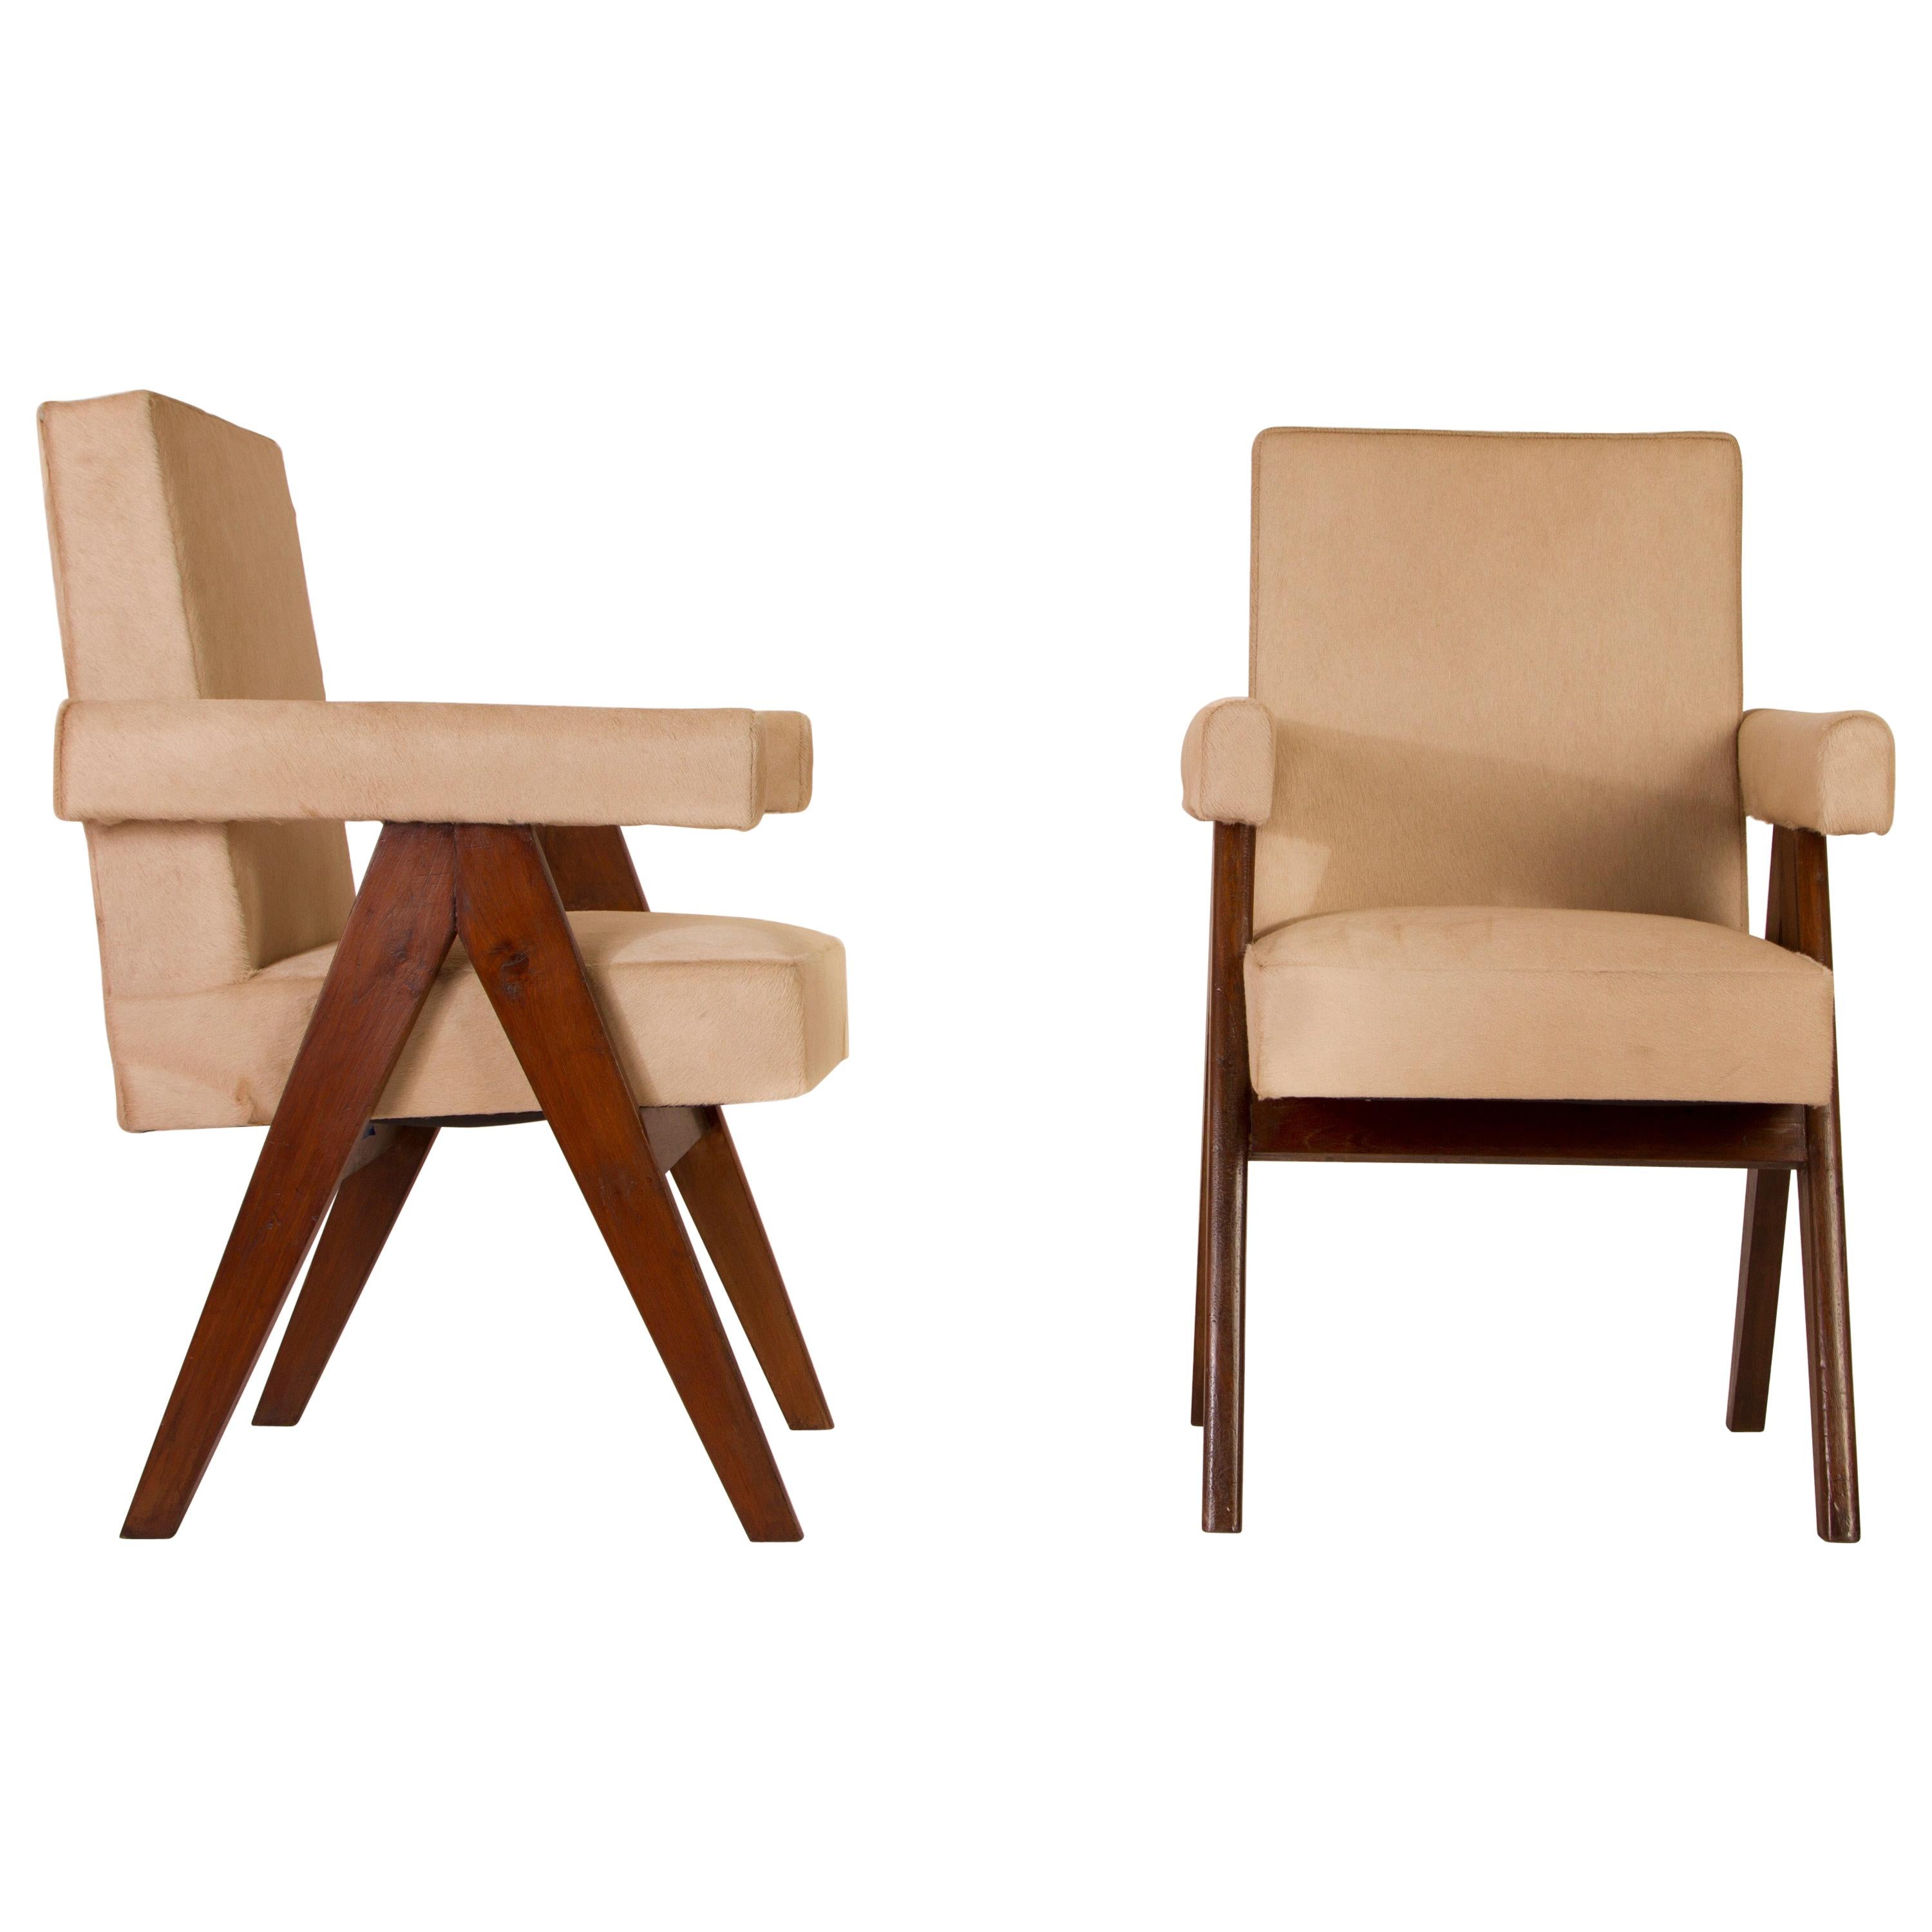 Pierre Jeanneret Pair of  Upholstered Committee Armchairs, Circa 1954